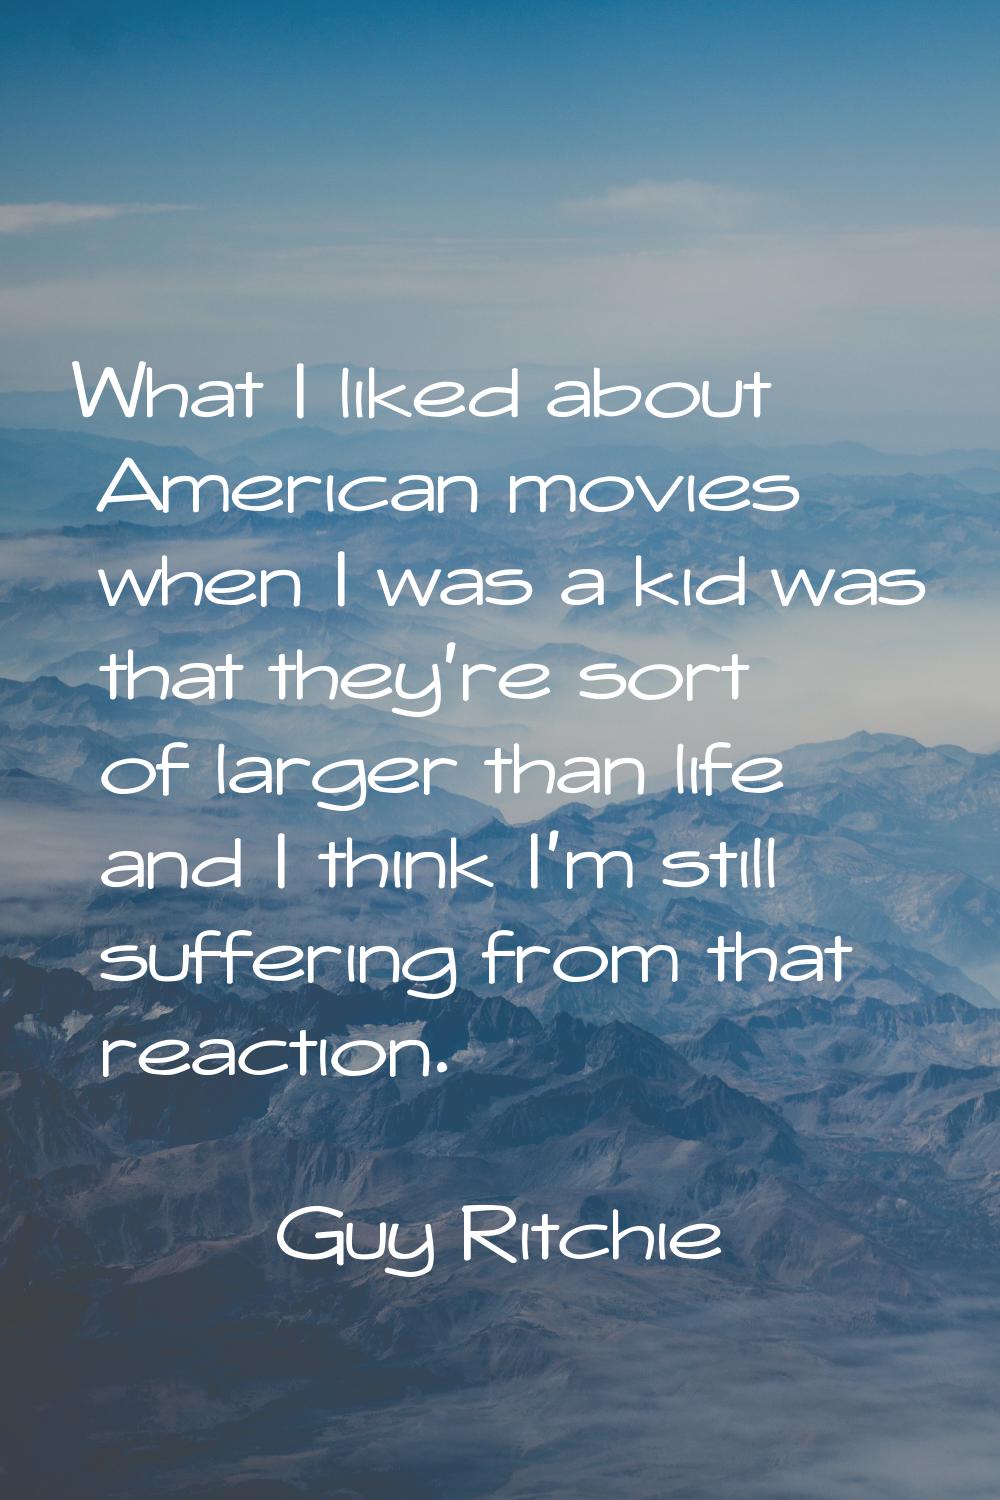 What I liked about American movies when I was a kid was that they're sort of larger than life and I